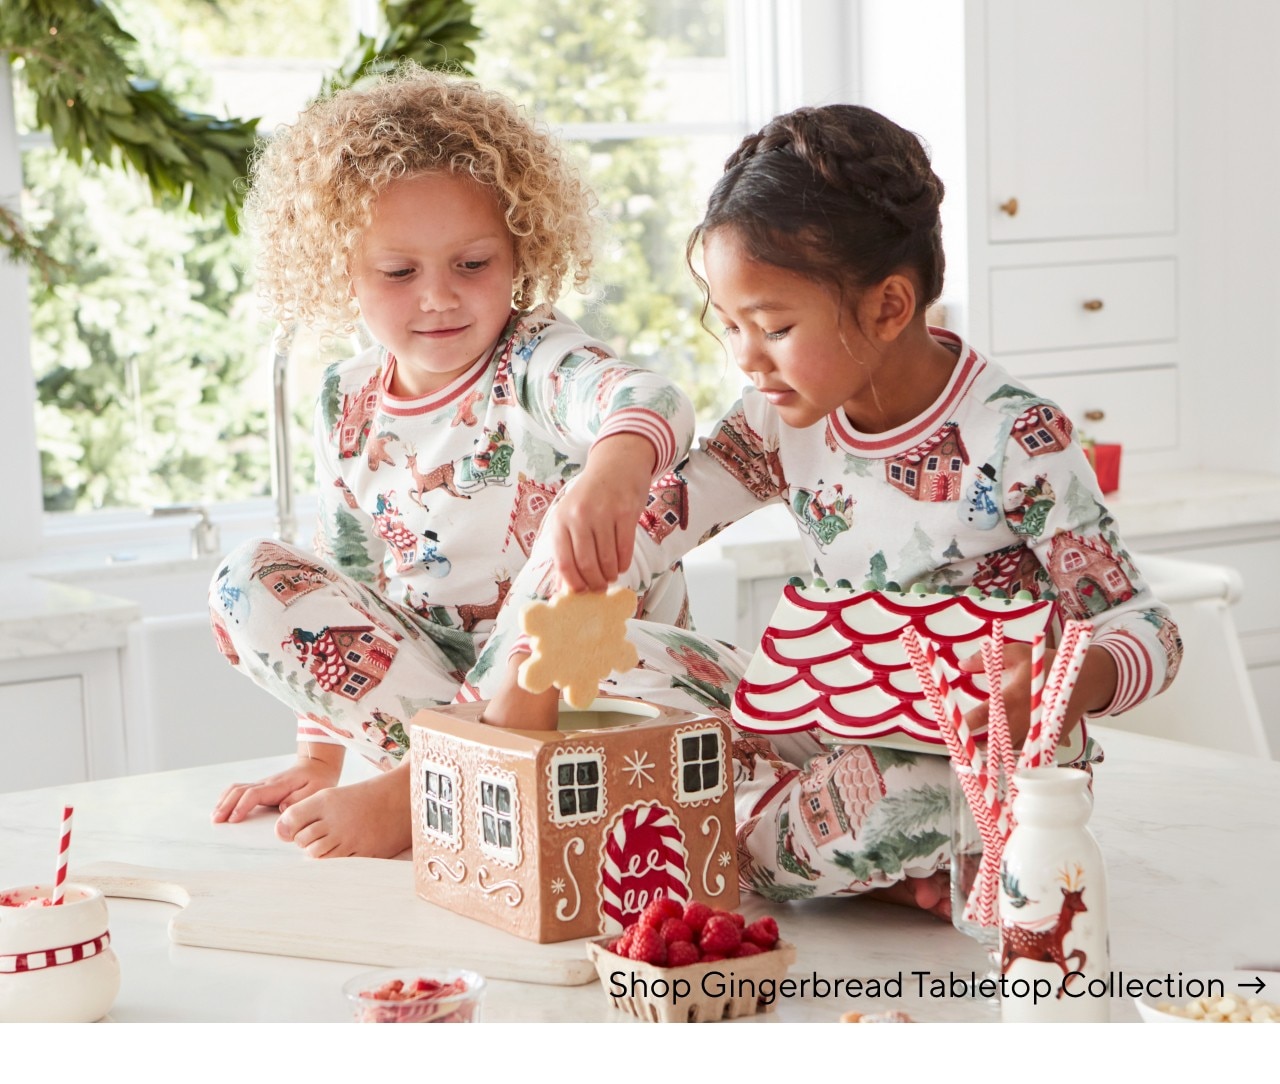 SHOP GINGERBREAD TABLETOP COLLECTION